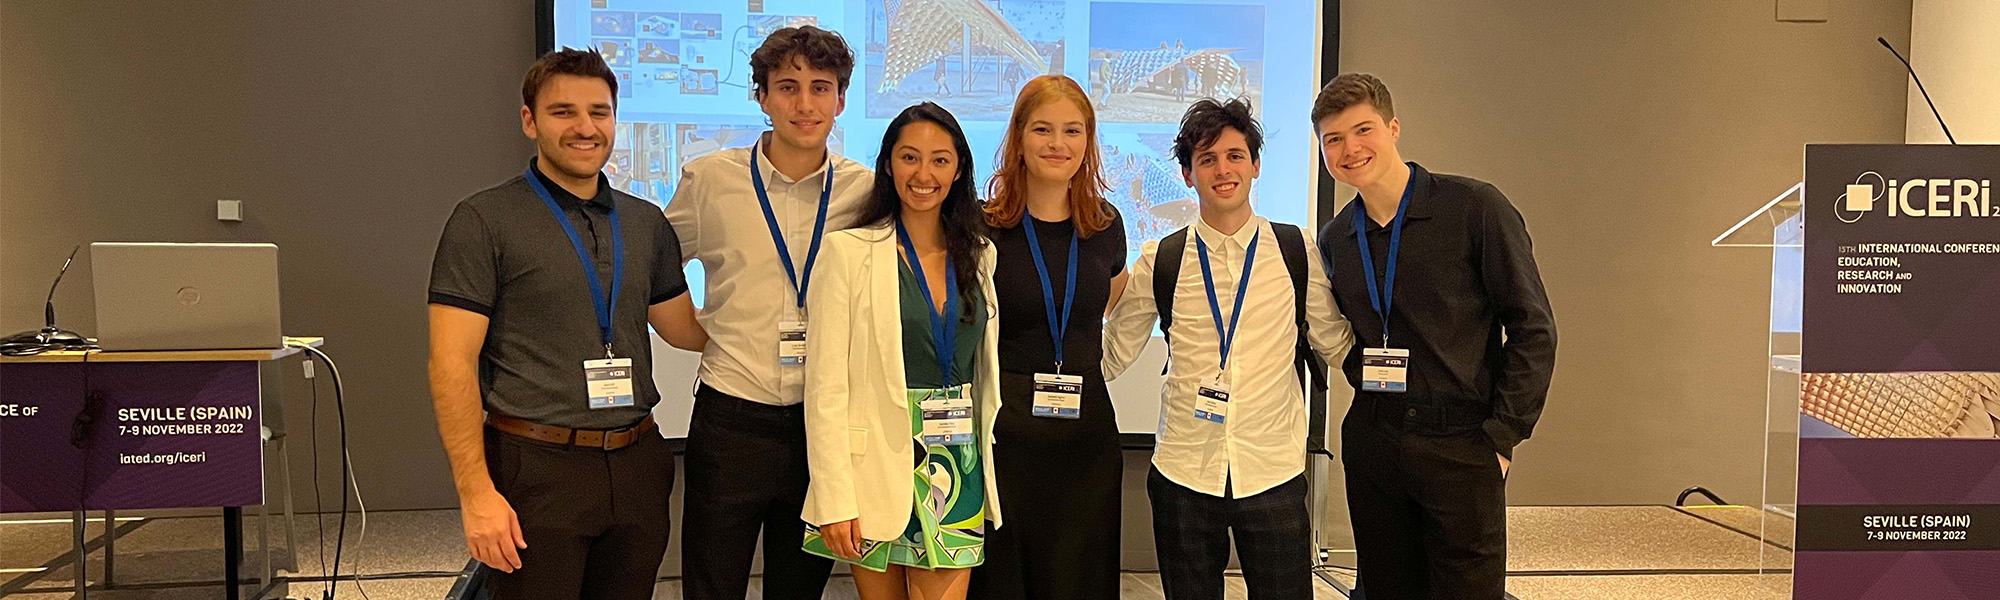 Cropped image of undergraduate students Ariel Weiss, Jake Levy, Jake Kroft, Luke De Bartolo, Sadberk Agma, and Daniela Diaz presenting at the International Conference of Education, Research and Innovation.